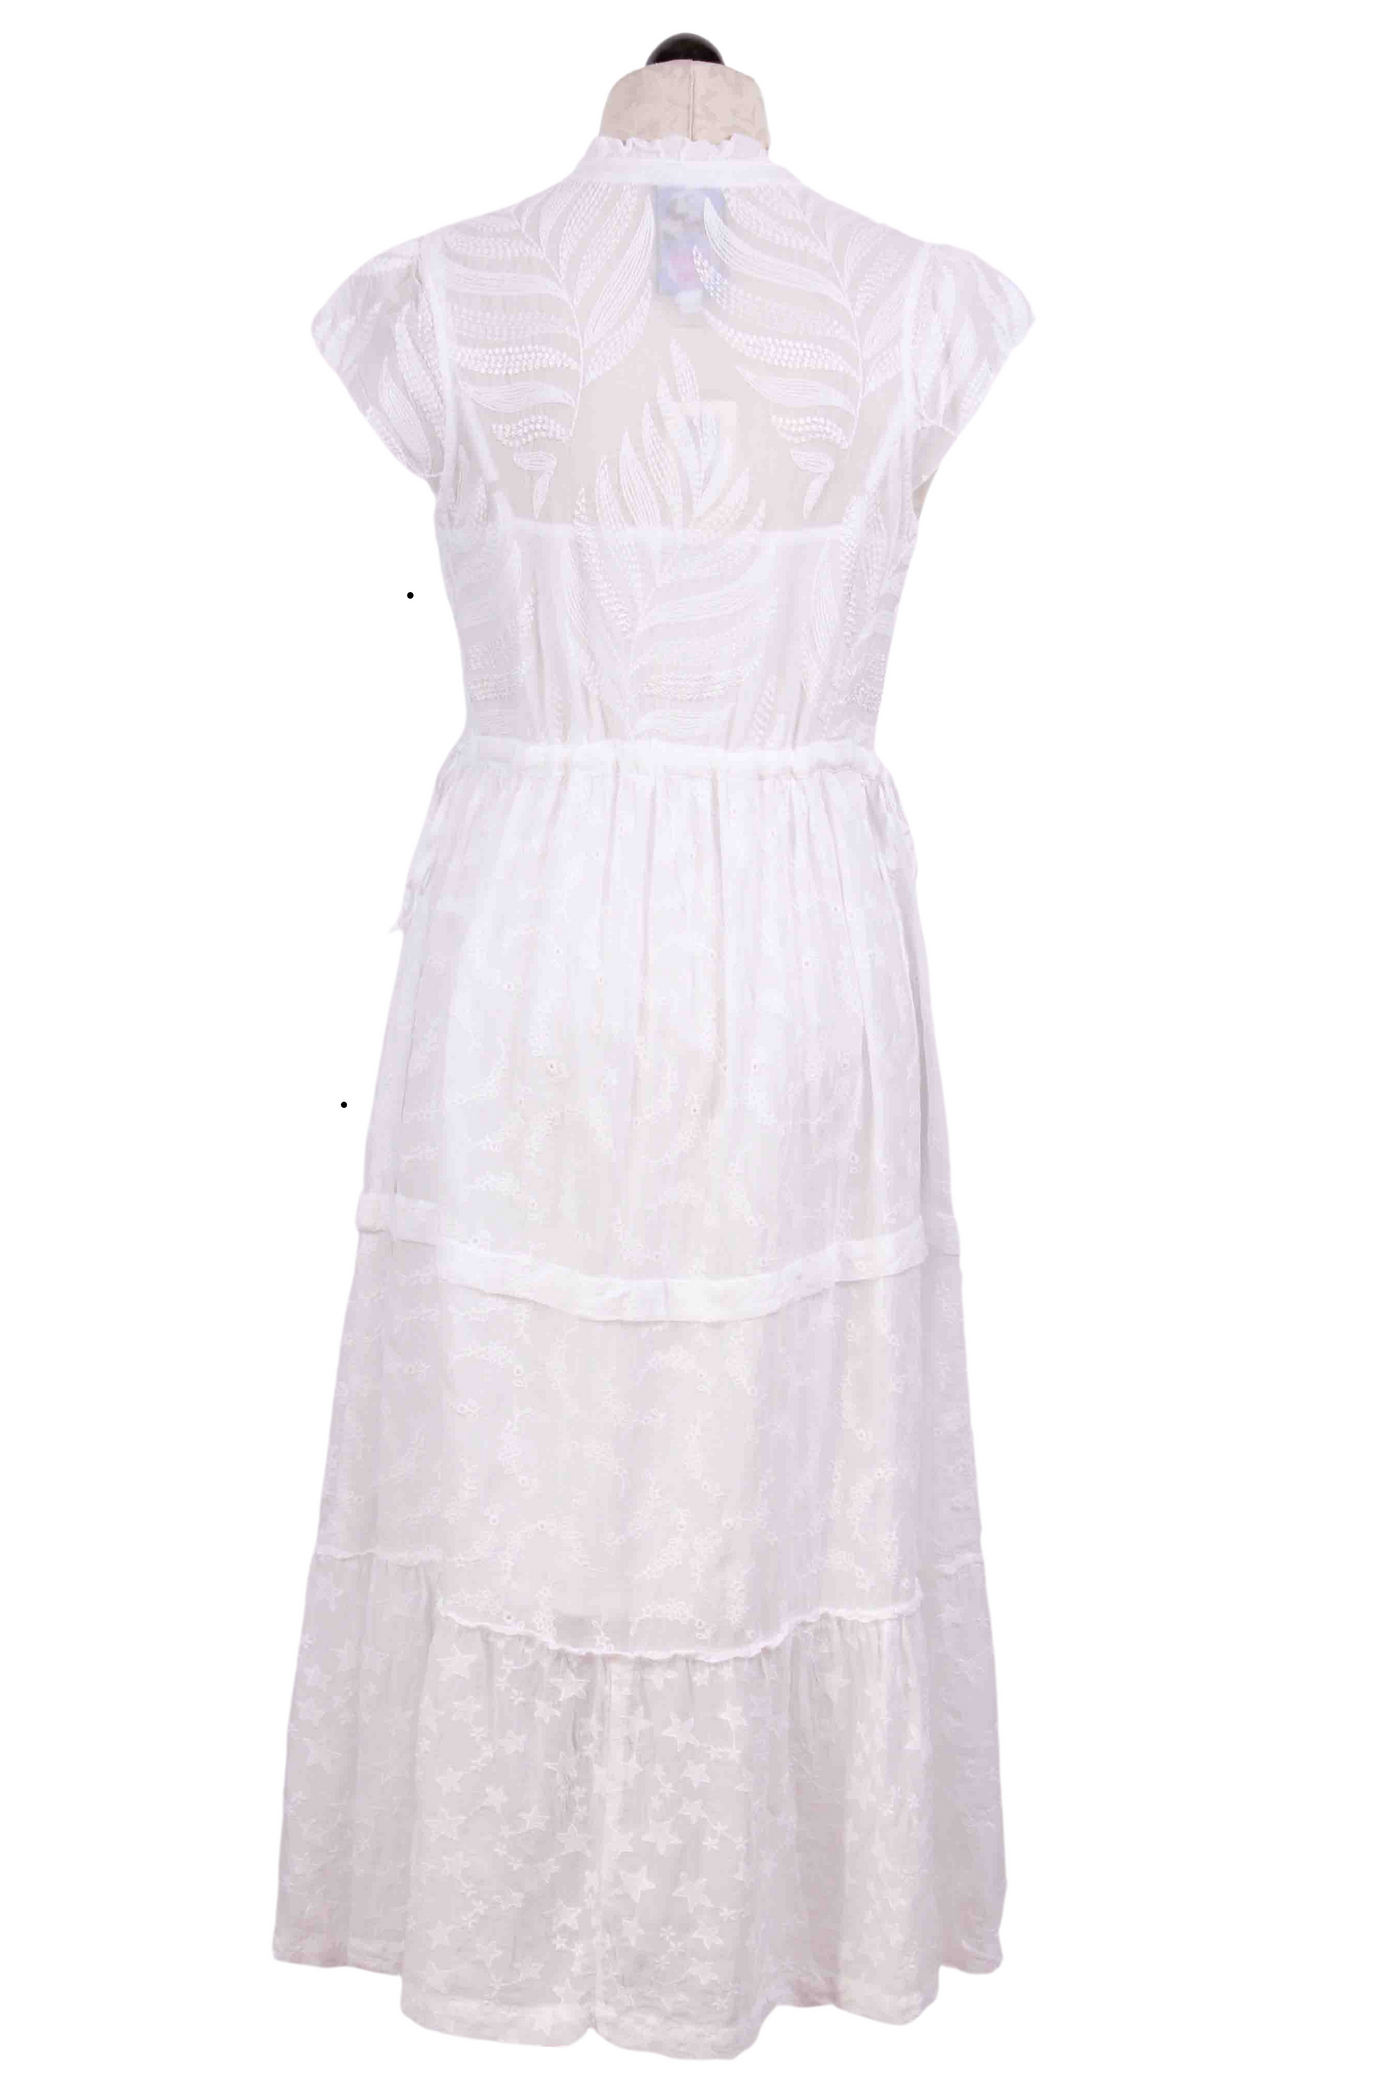 back view of White Embroidered Vitaly Midi Dress with Slip by Johnny Was